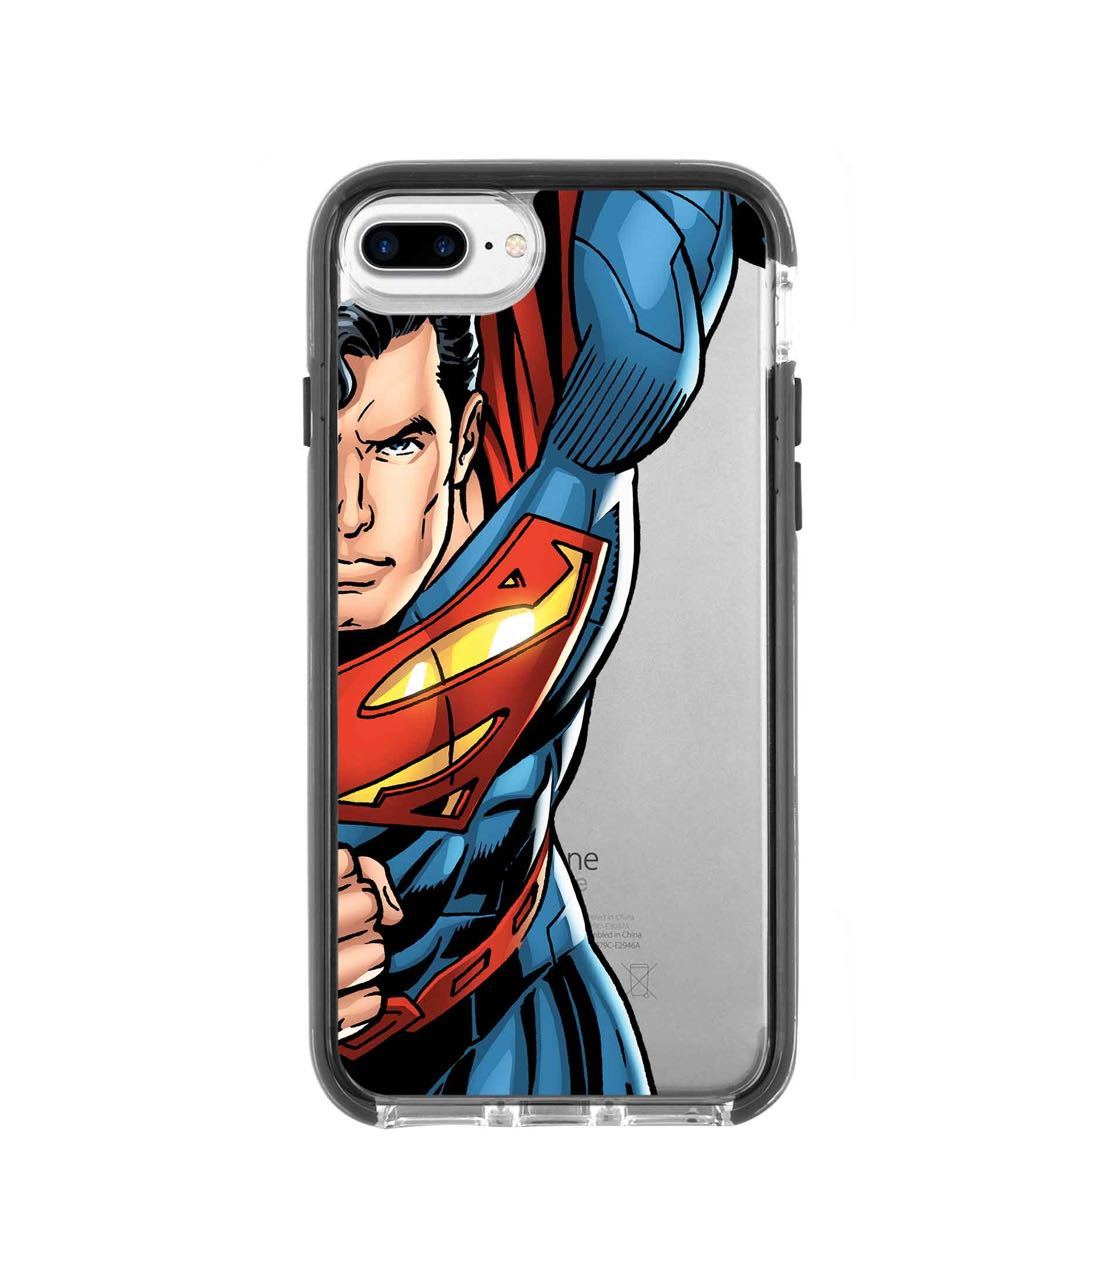 Speed it like Superman - Extreme Phone Case for iPhone 7 Plus